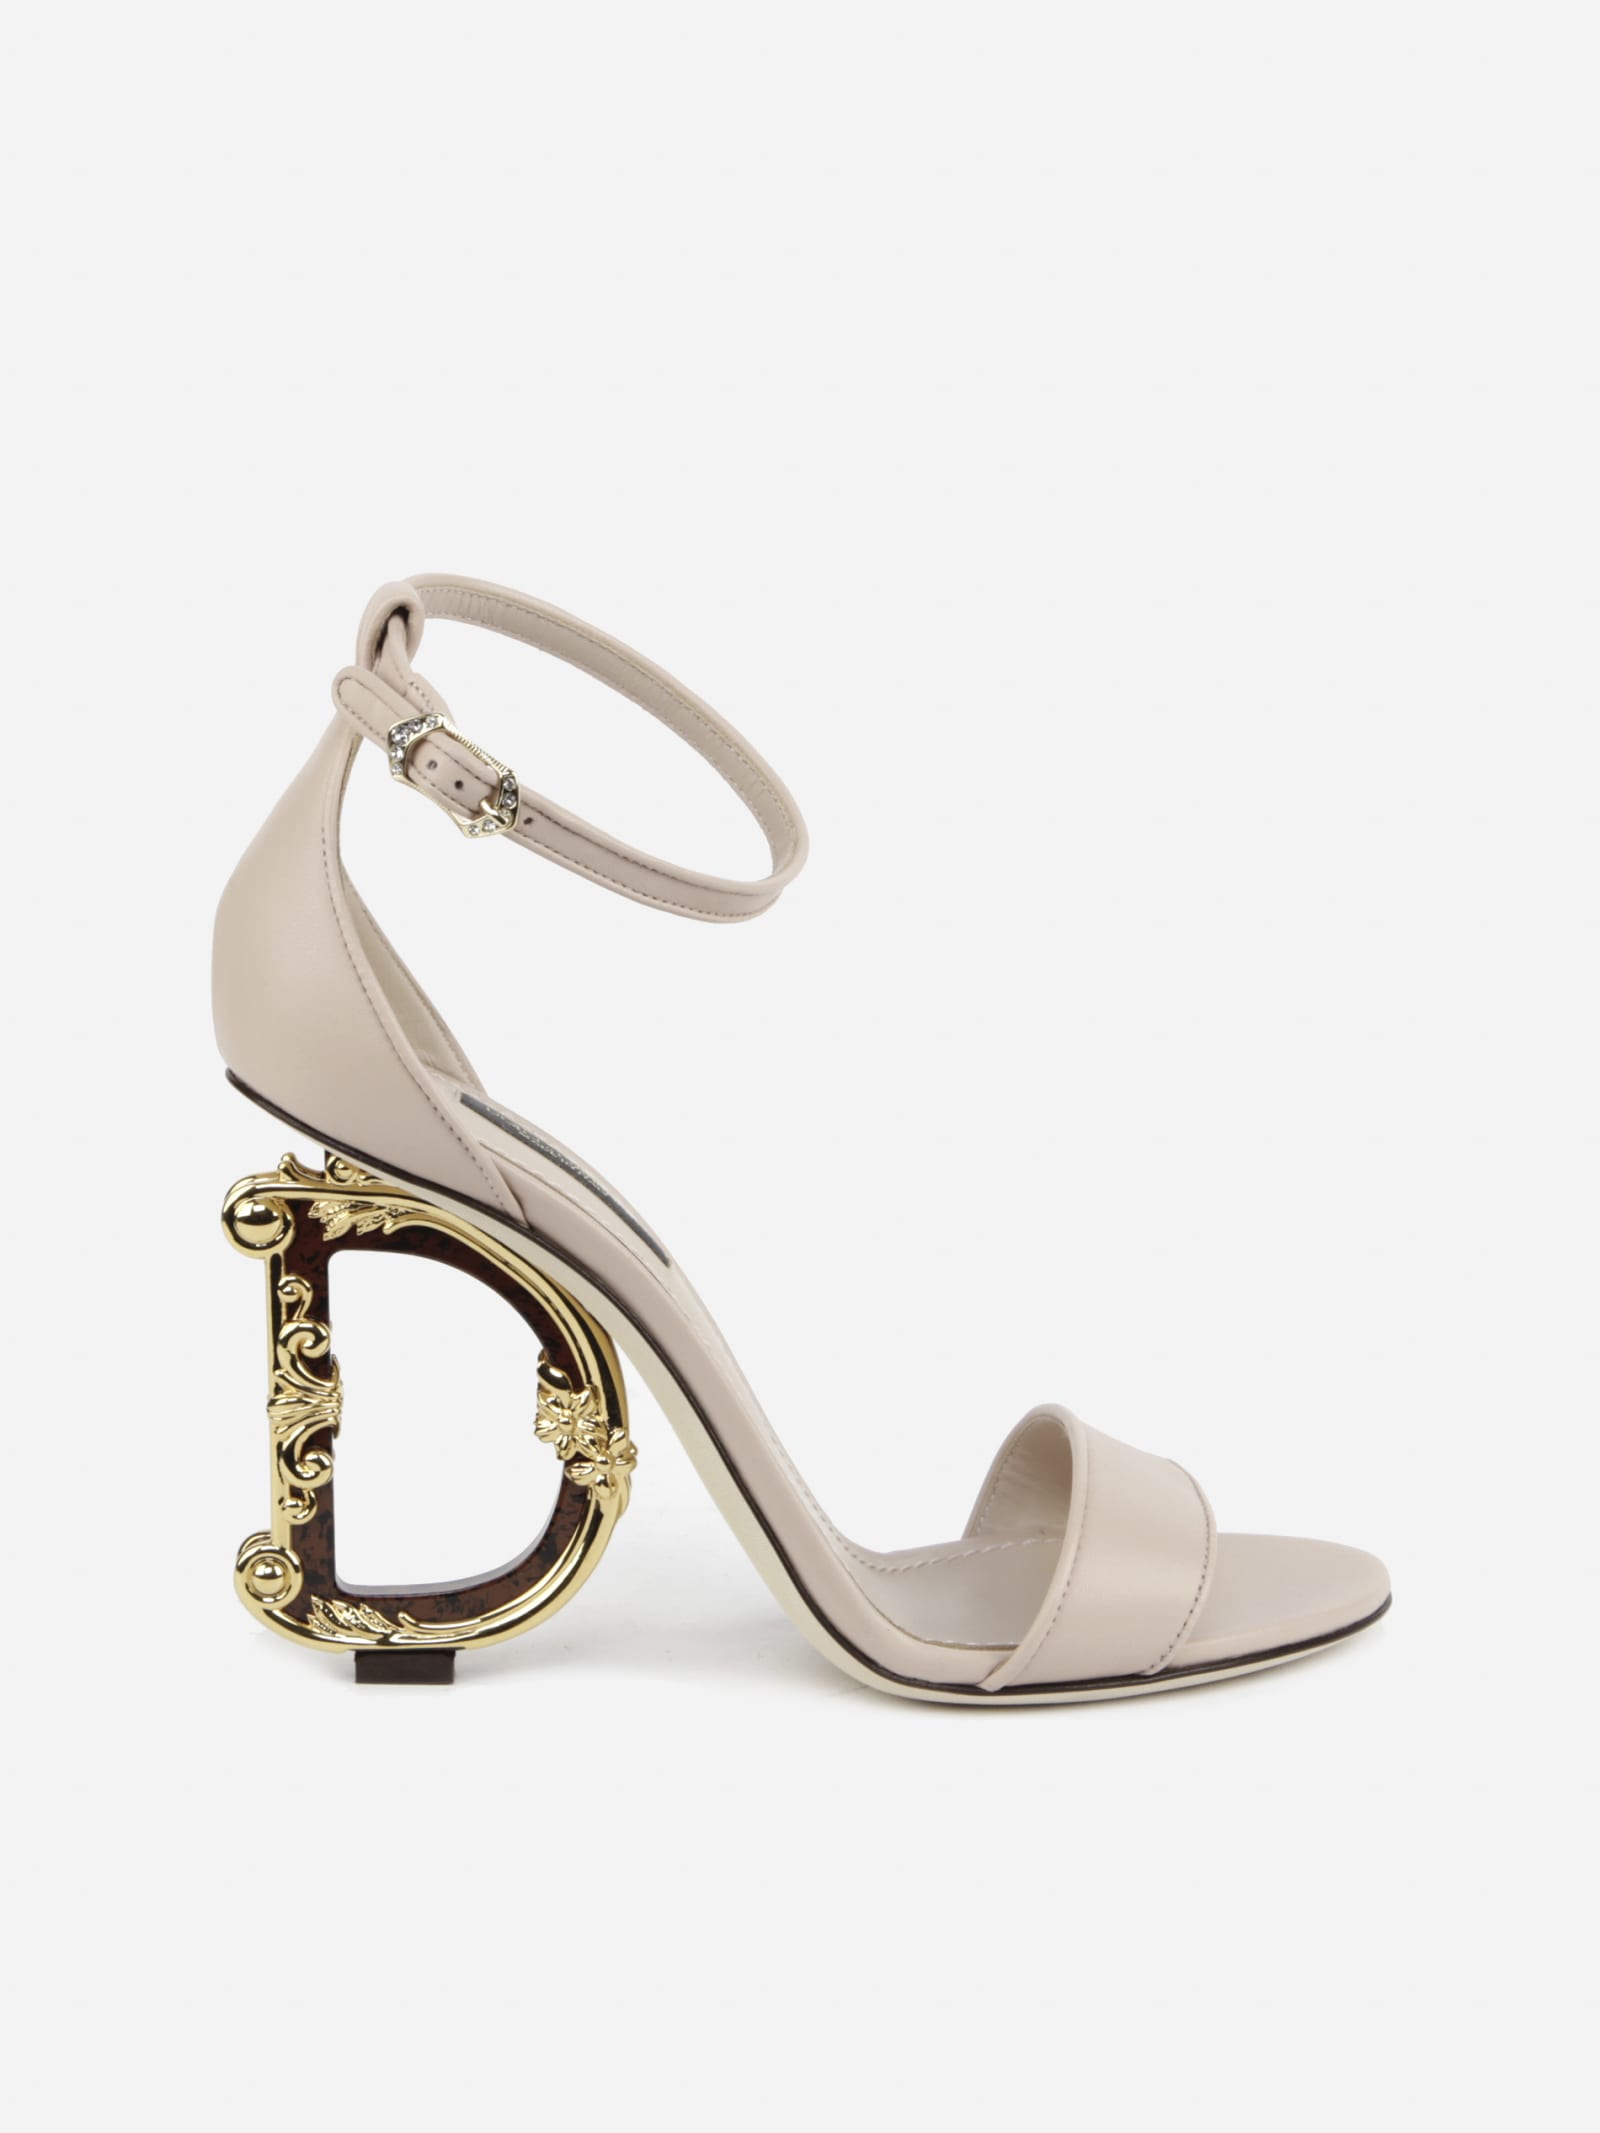 Buy Dolce & Gabbana Dg Barocco Nappa Leather Sandals online, shop Dolce & Gabbana shoes with free shipping